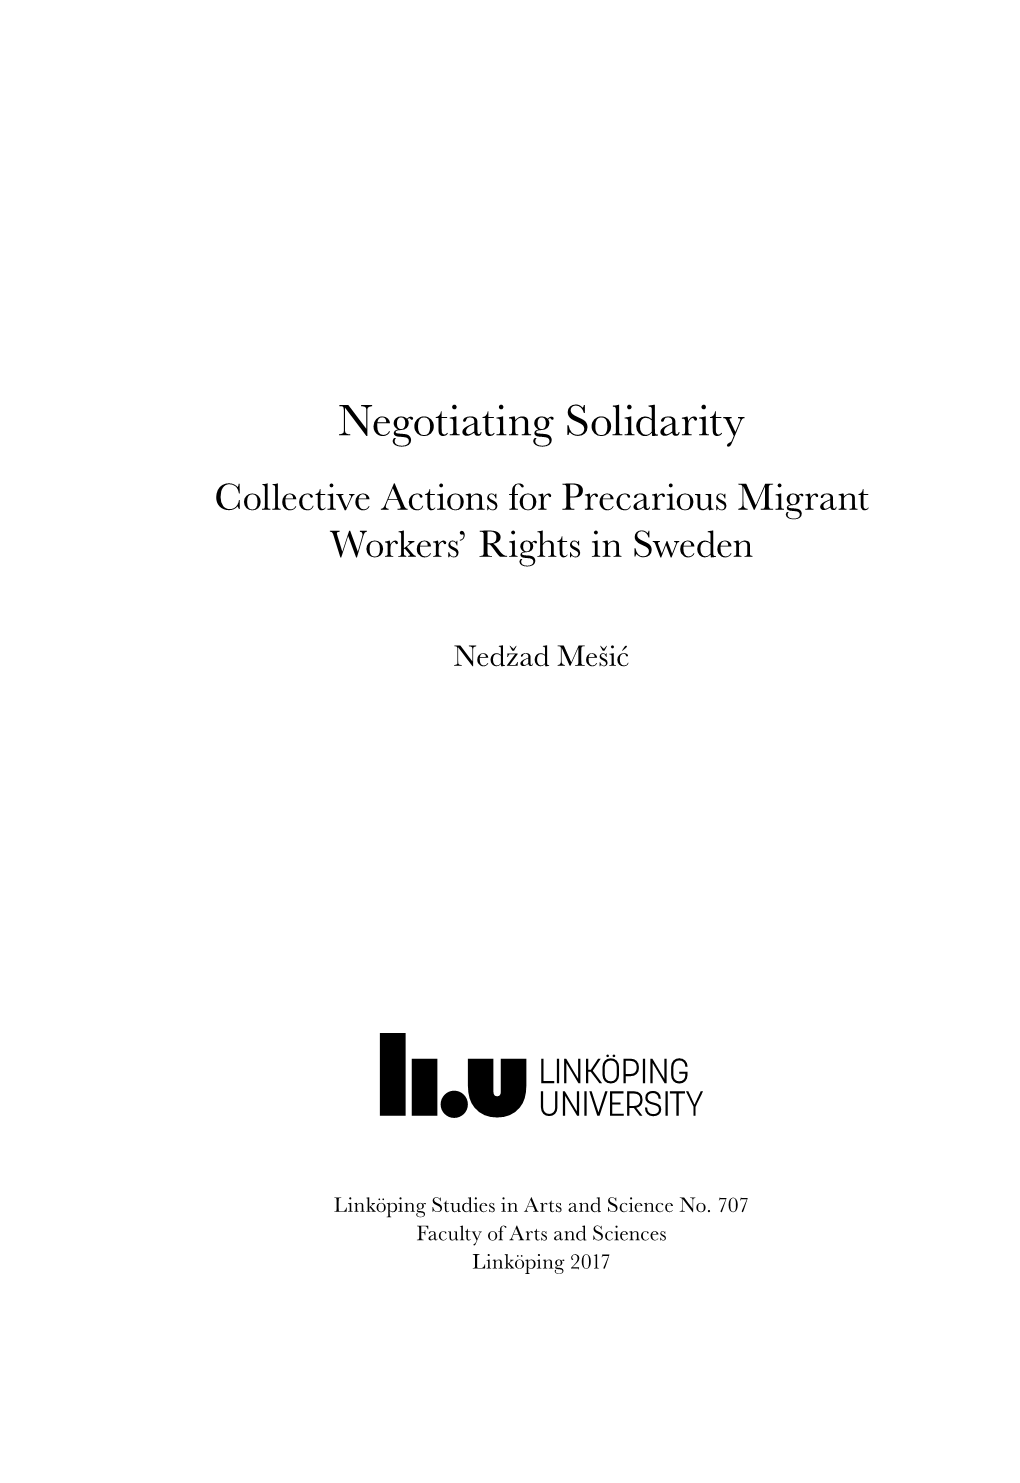 Negotiating Solidarity Collective Actions for Precarious Migrant Workers' Rights in Sweden